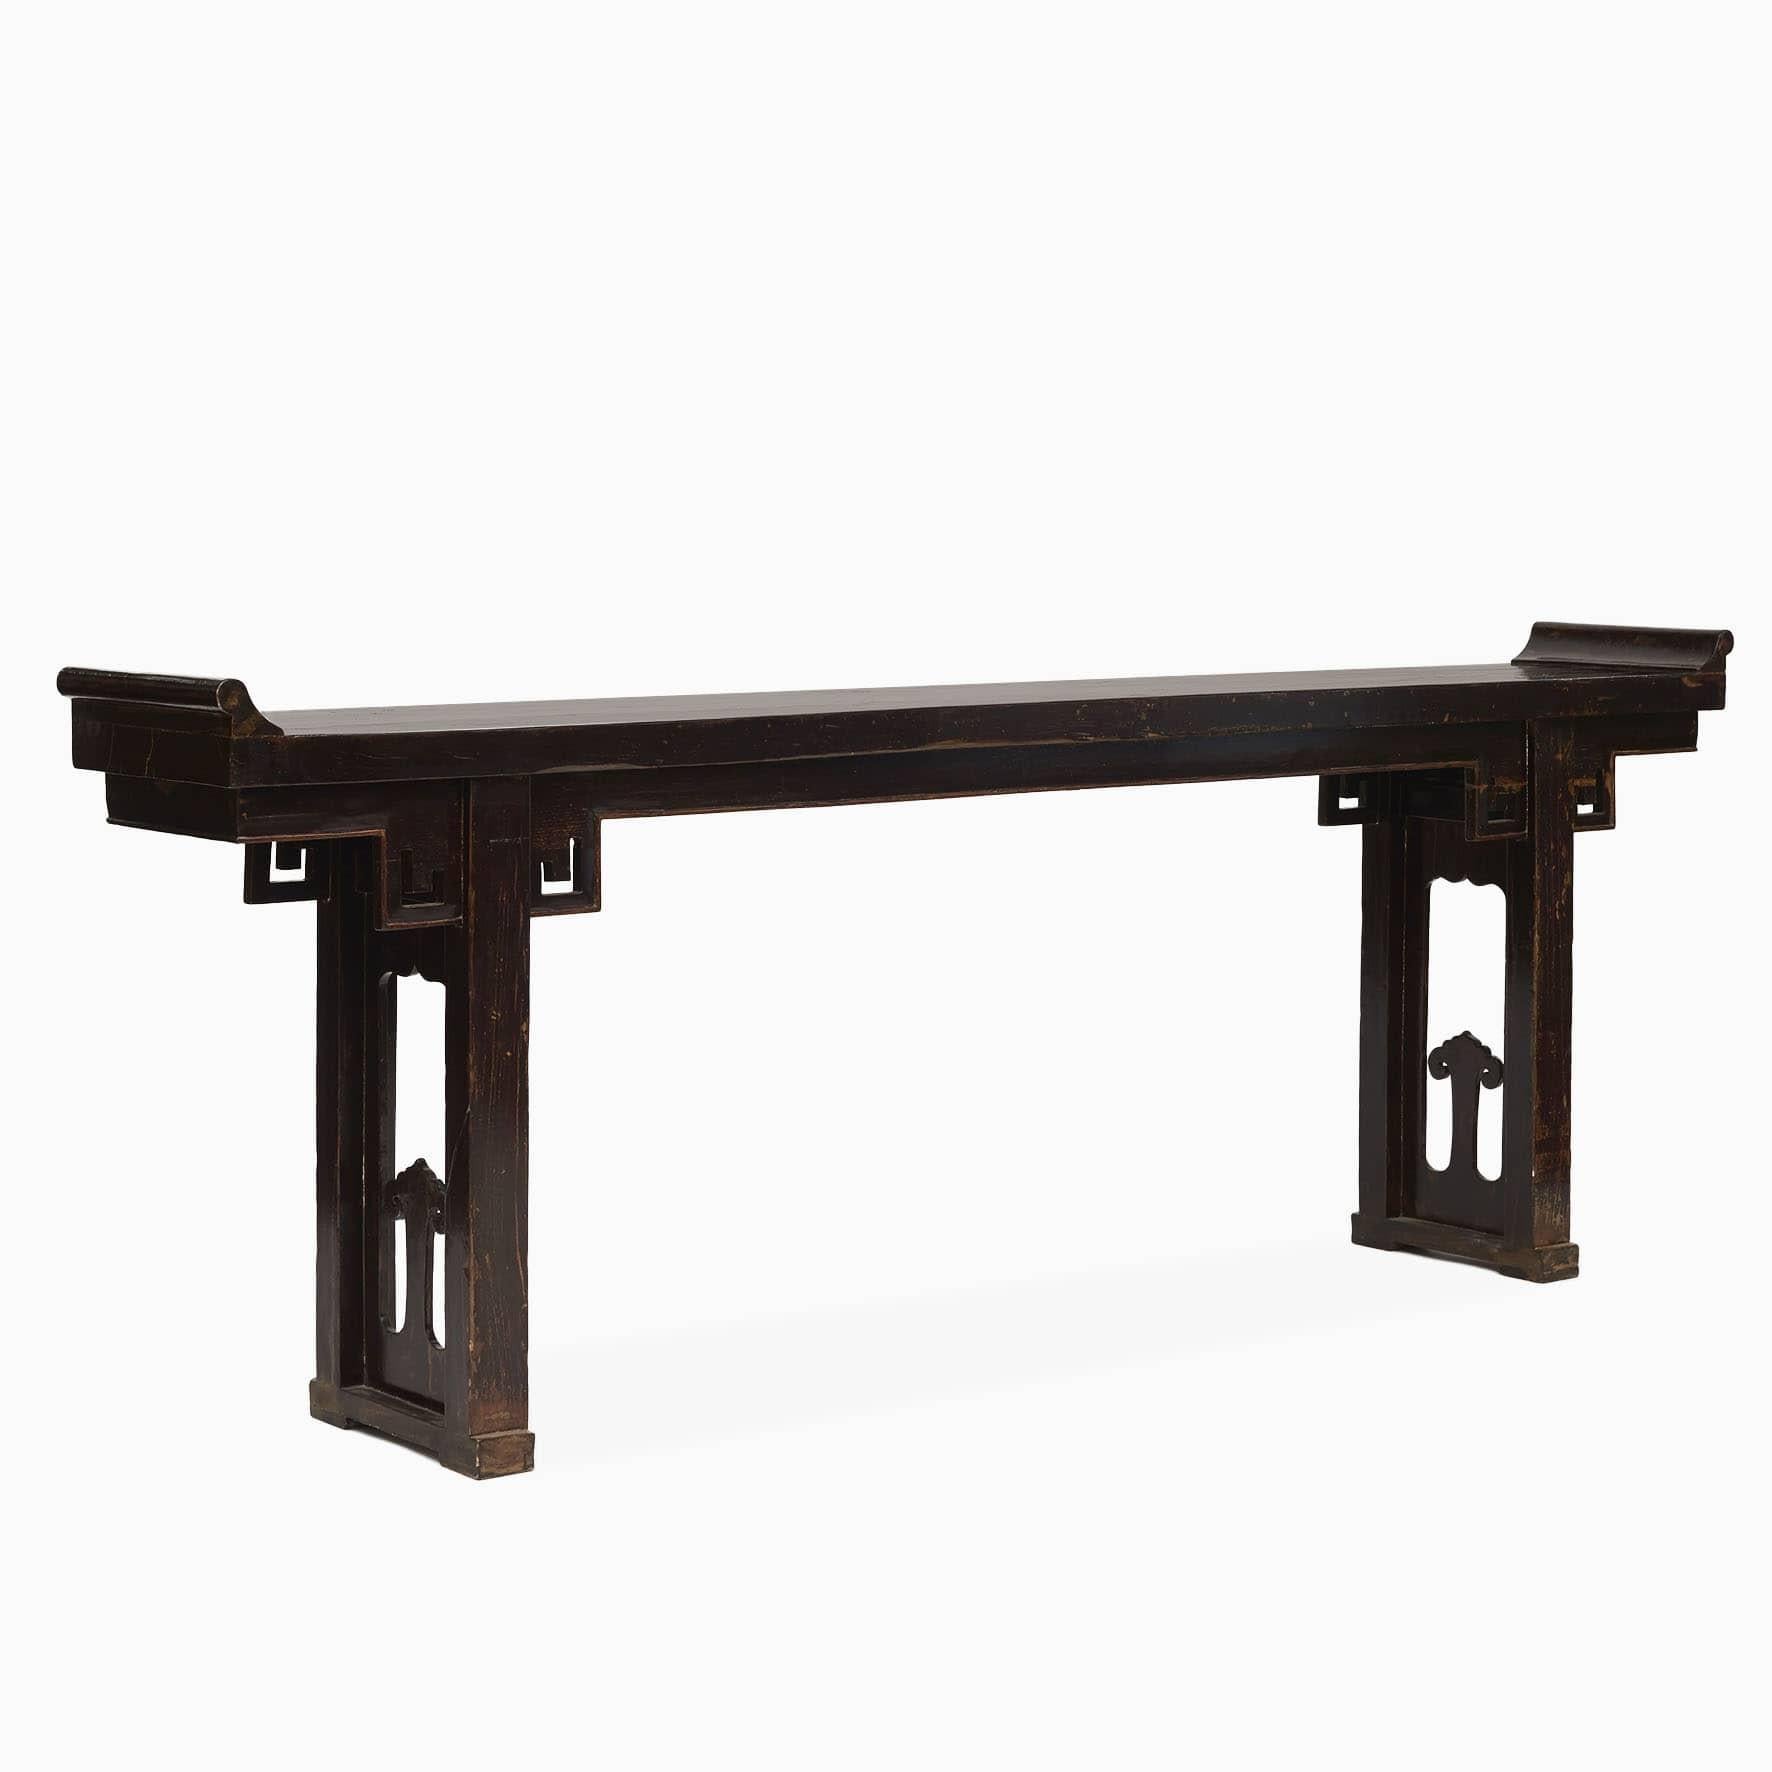 A long and elegant altar or console table in original condition. 
Walnut with a dark burgundy lacquer. Carved details and spandrels on both side of the table. Freestanding.
Good craftsmanship with natural age-related patina.
Chinese altar tables